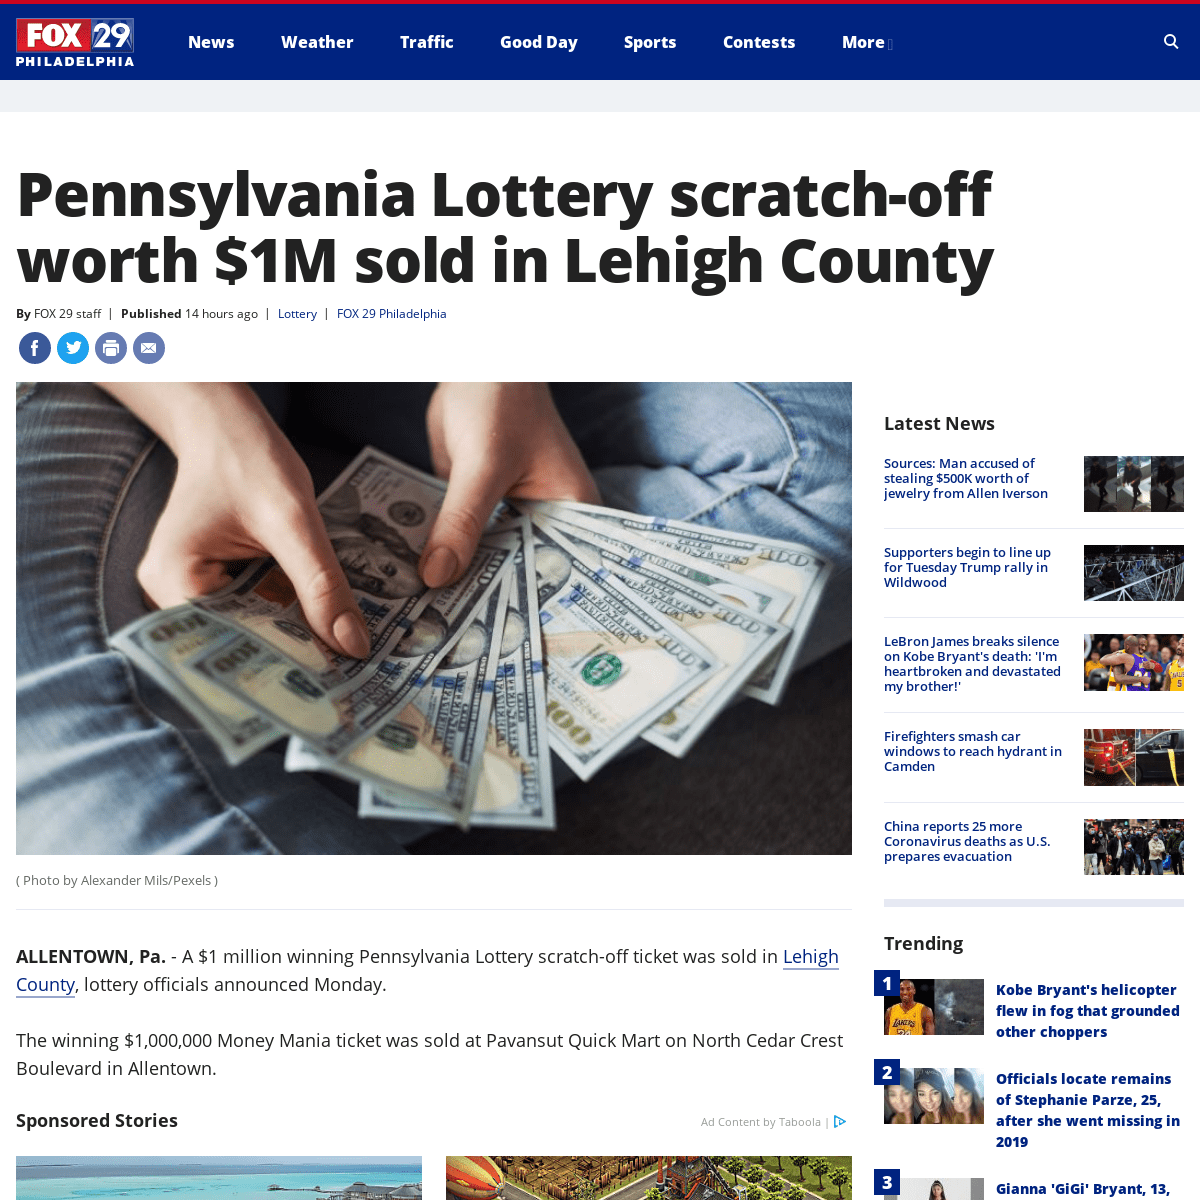 A complete backup of www.fox29.com/news/pennsylvania-lottery-scratch-off-worth-1m-sold-in-lehigh-county